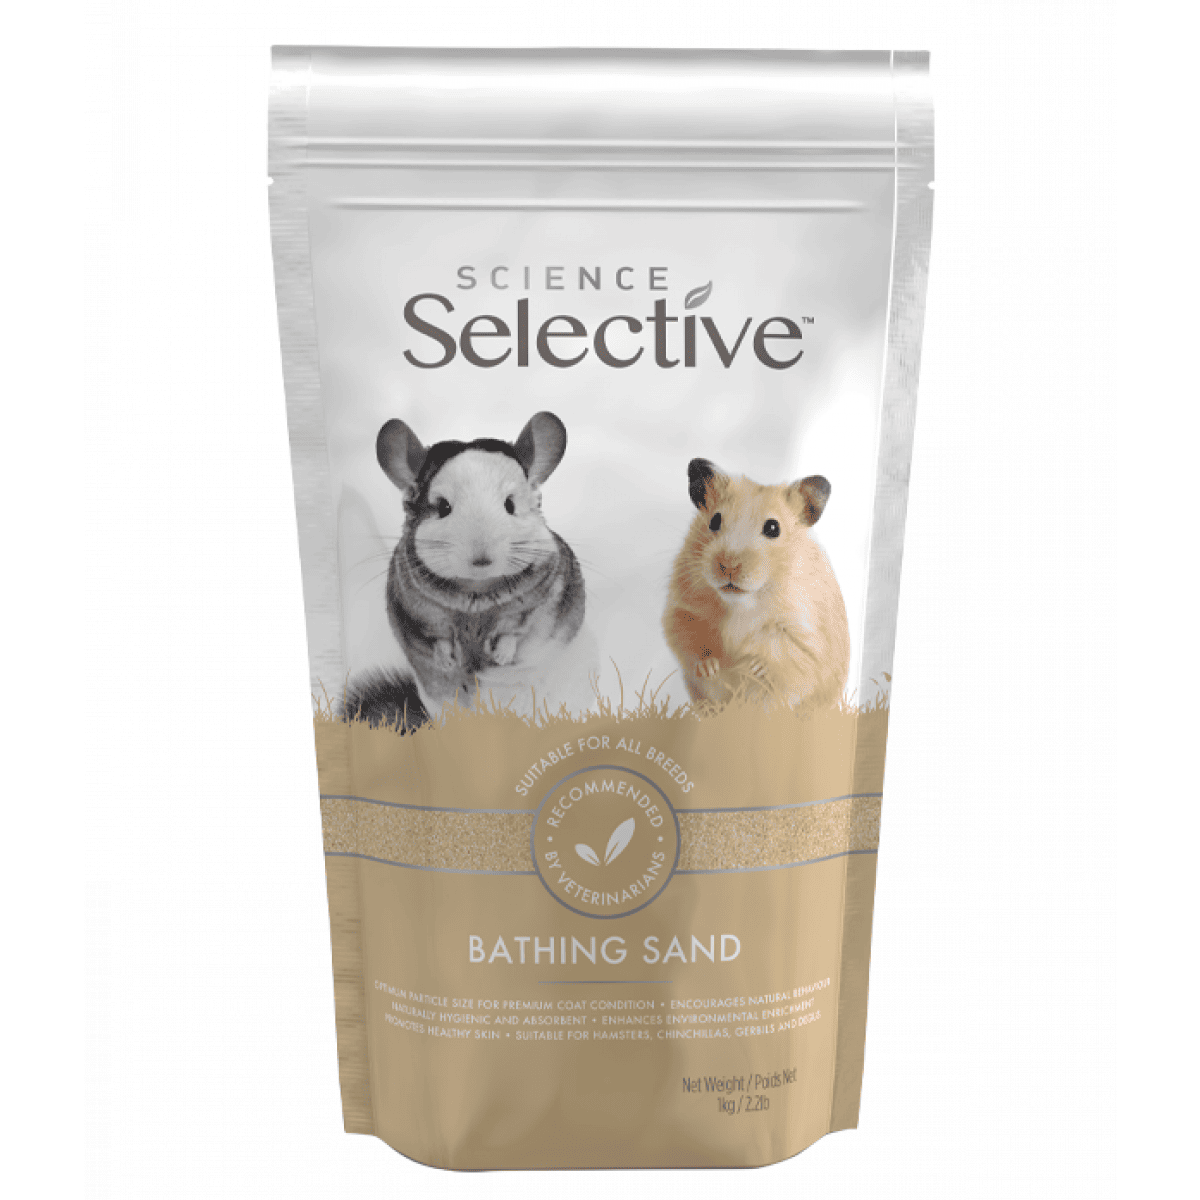 Science Selective Bathing Sand – Pawfect Supplies Ltd Product Image